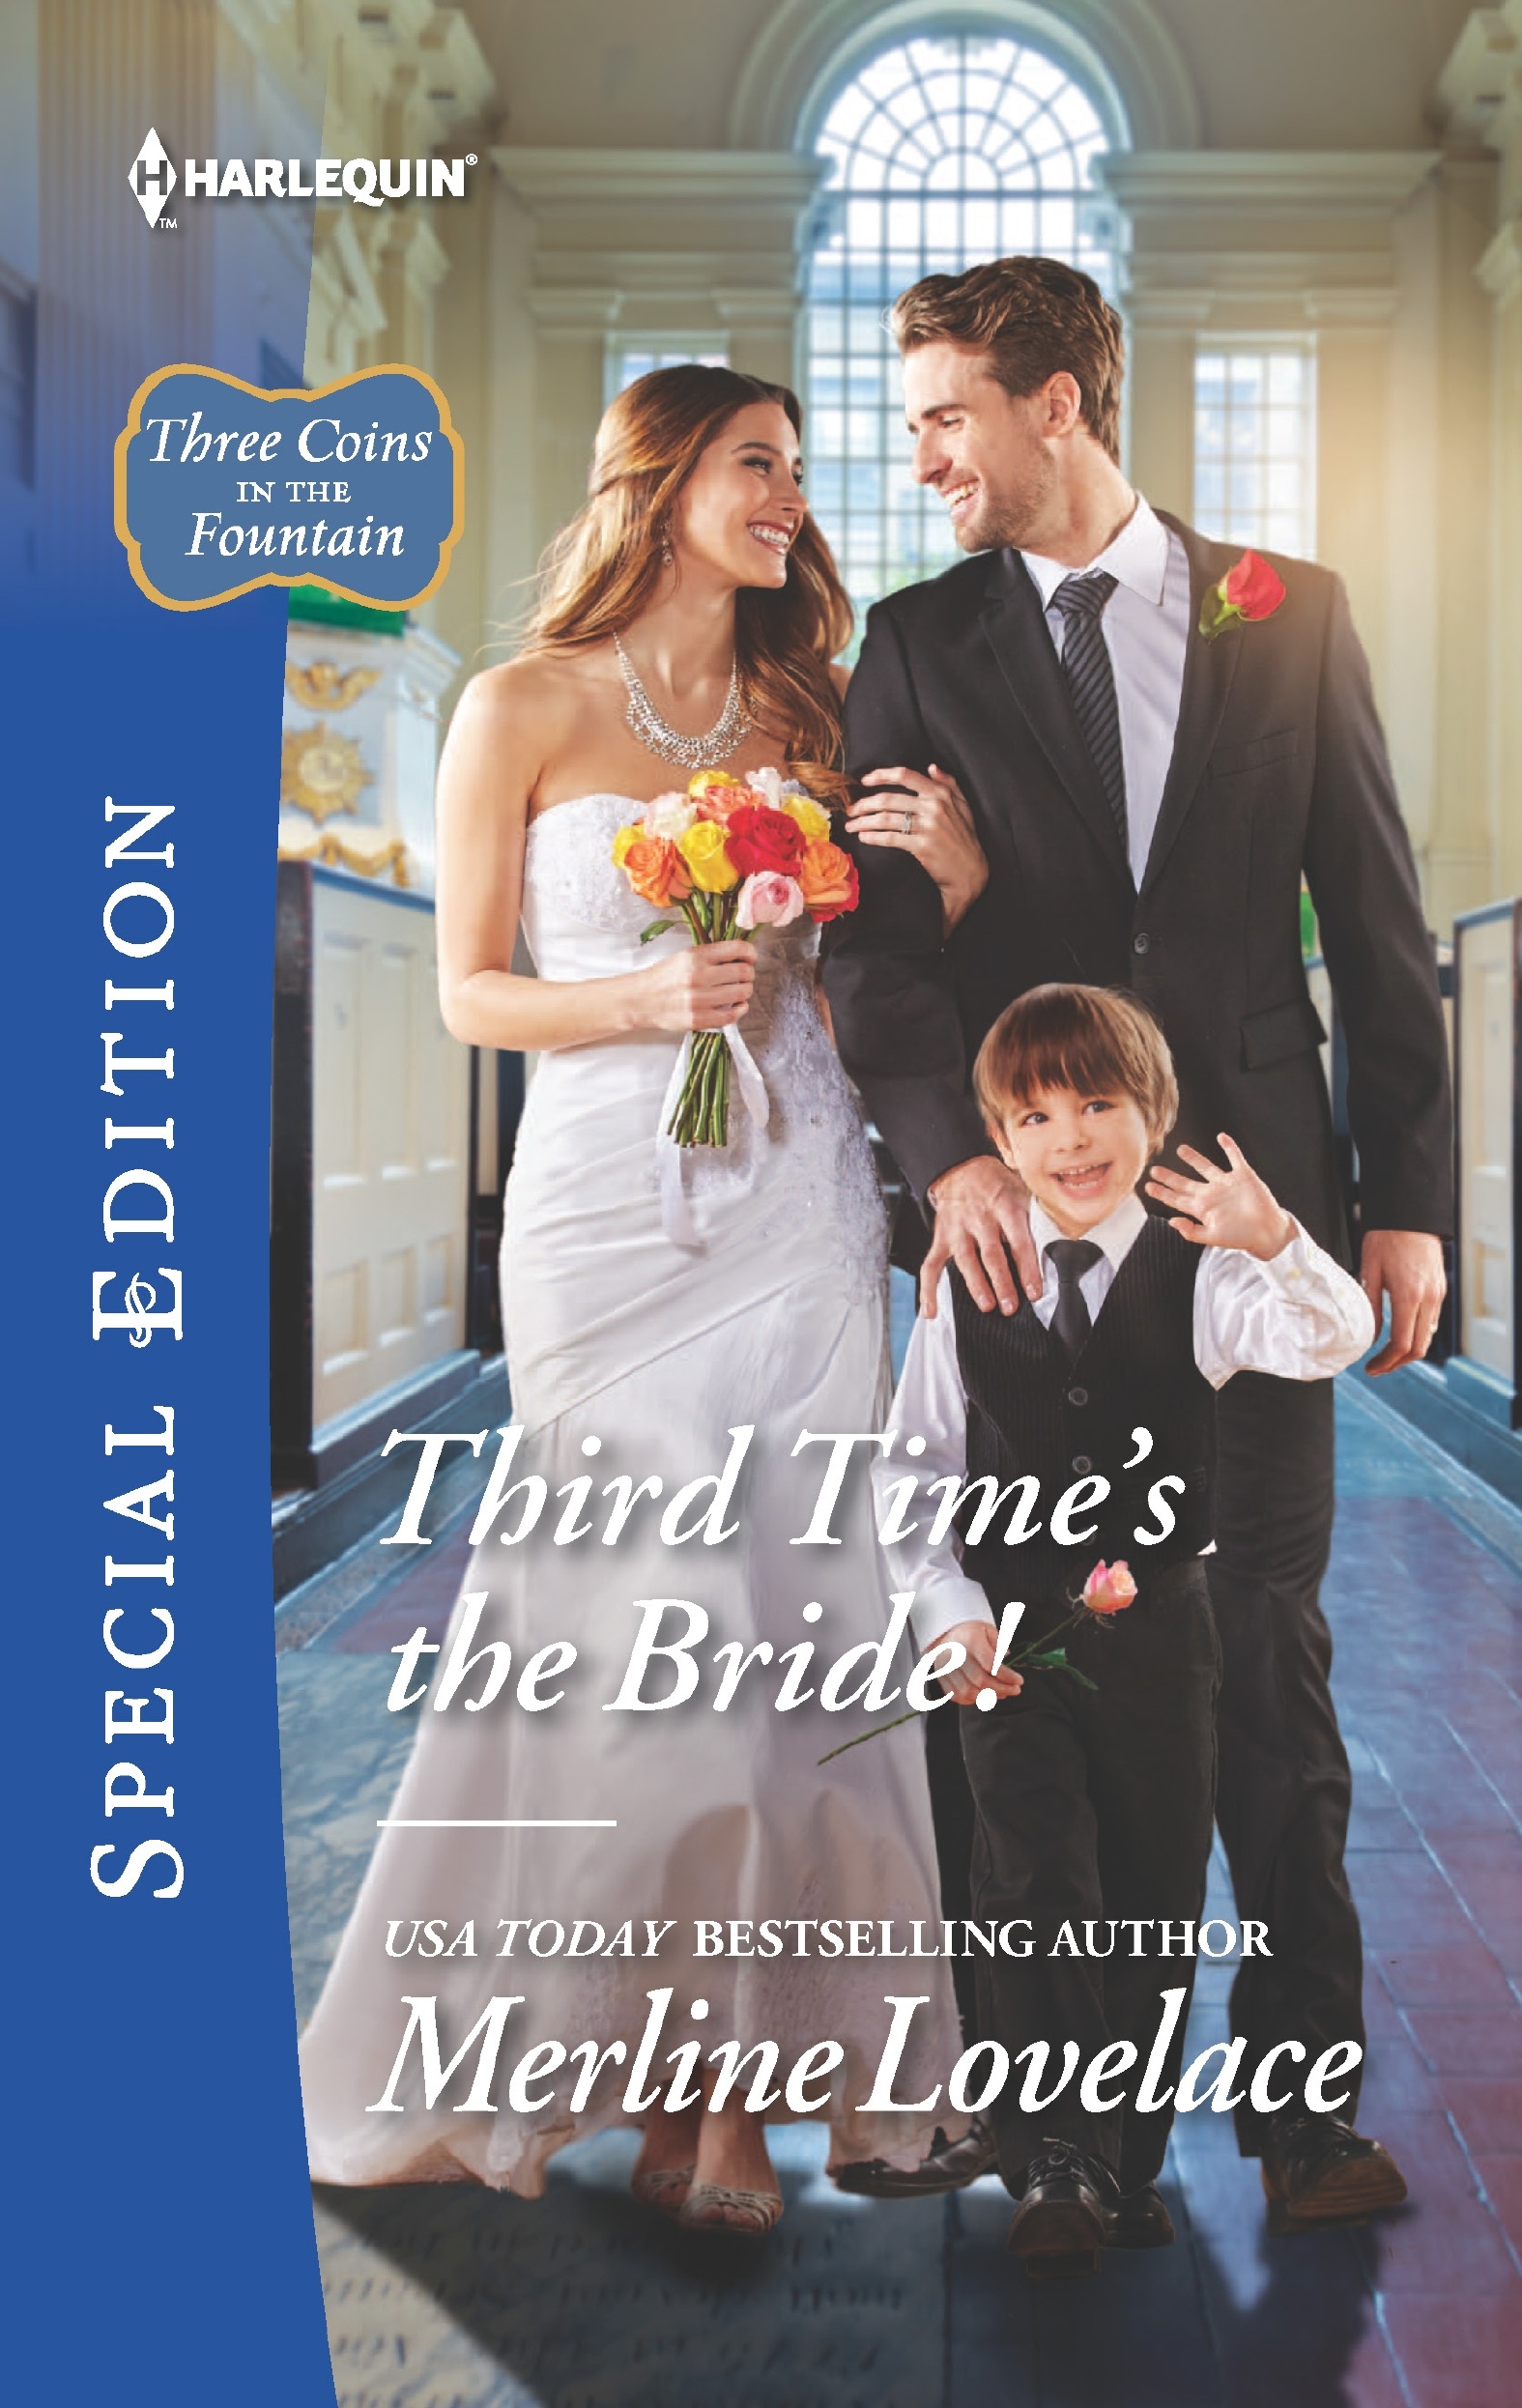 Third Time's the Bride! (2016) by Merline Lovelace